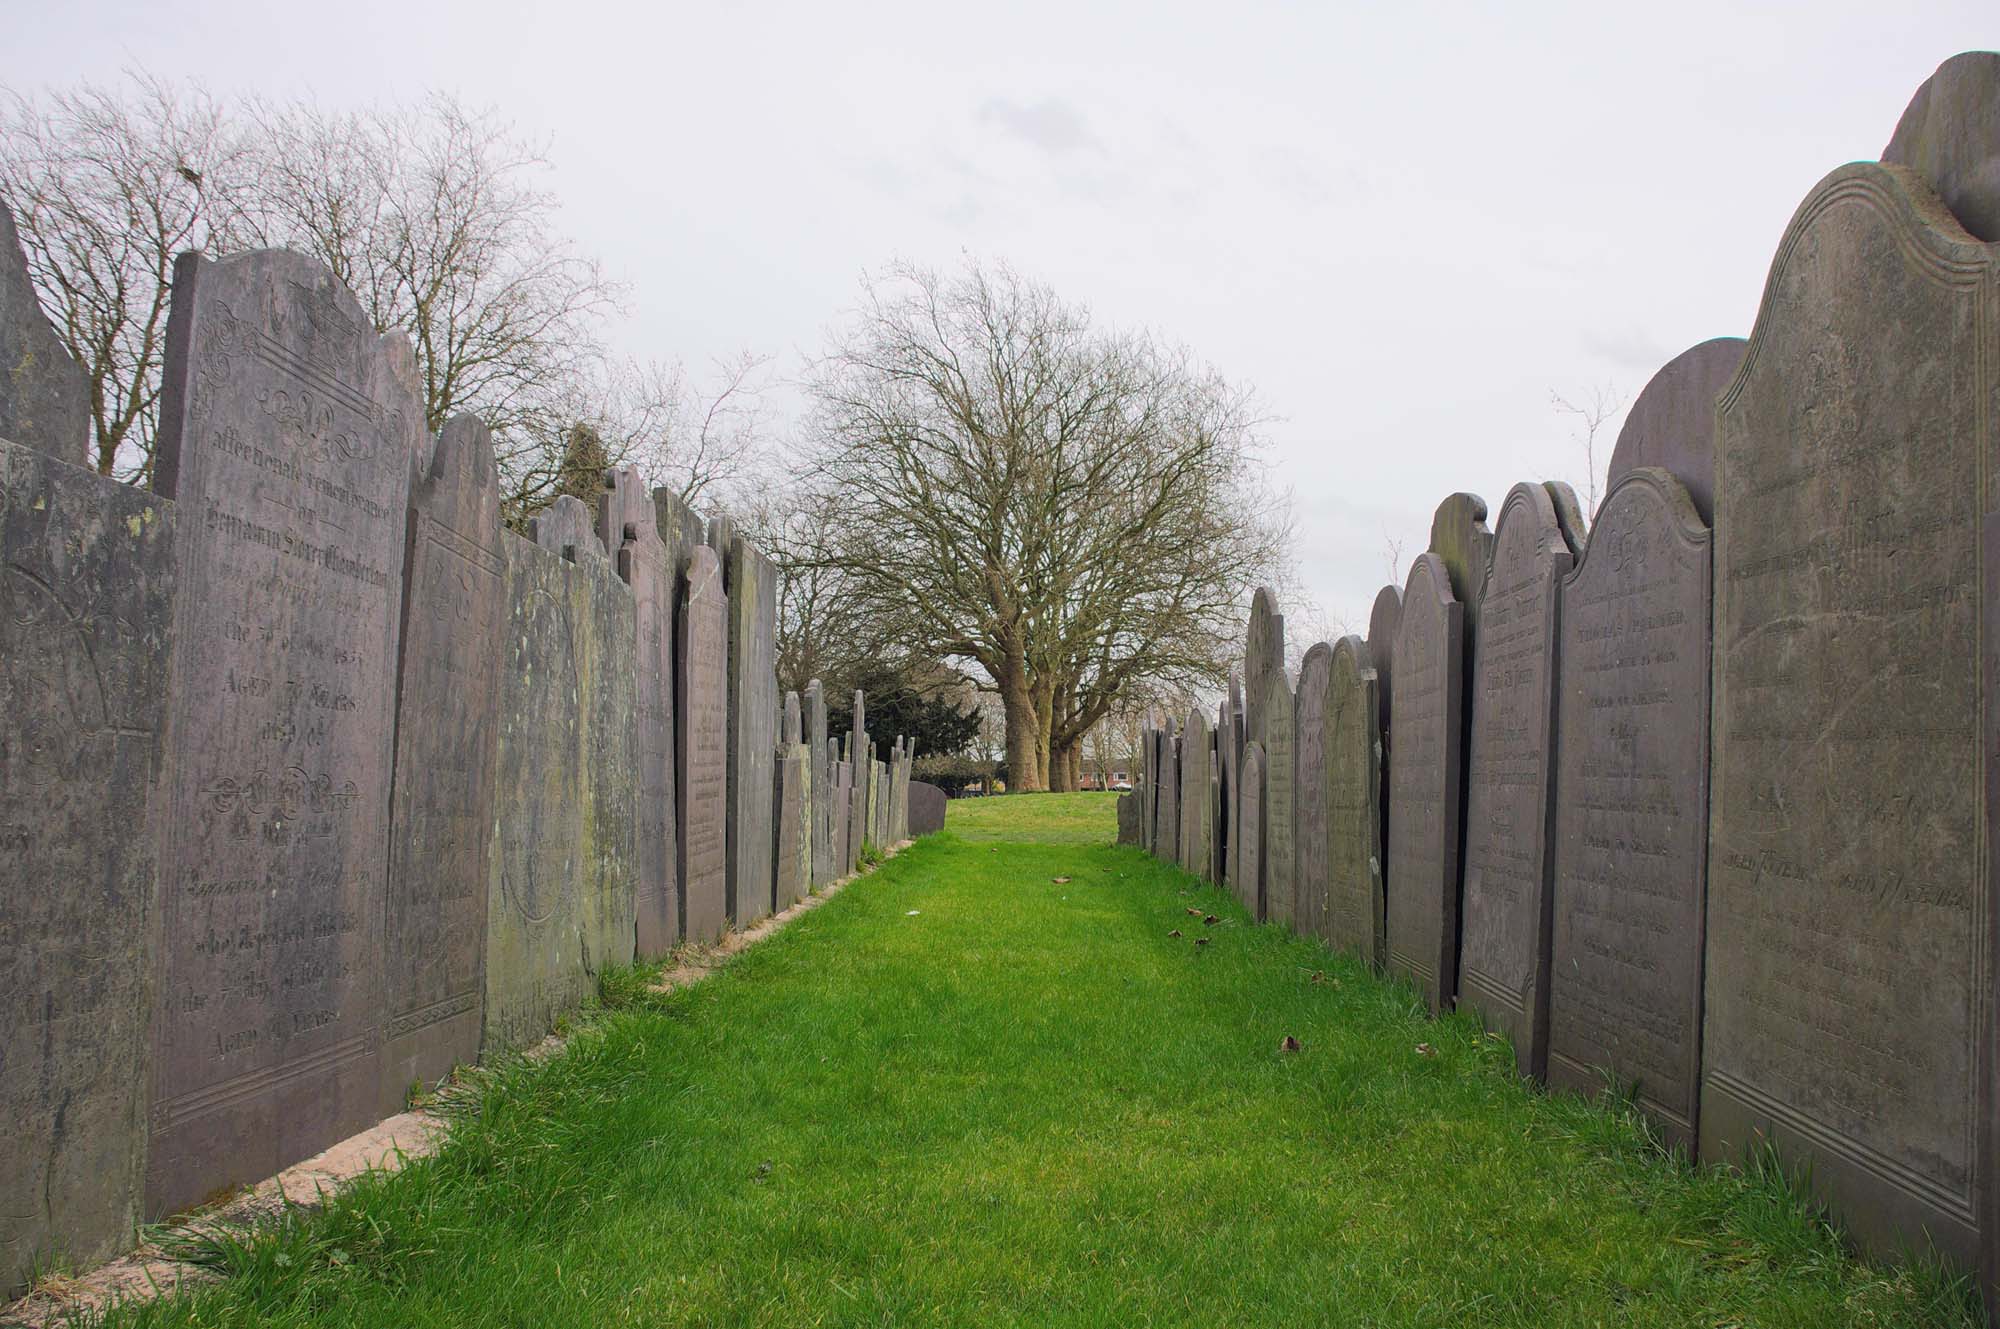 Memorial stones were relocated to Saffron Hill Cemetery during works to the Leicester Cathedral grounds in the early 2000s -